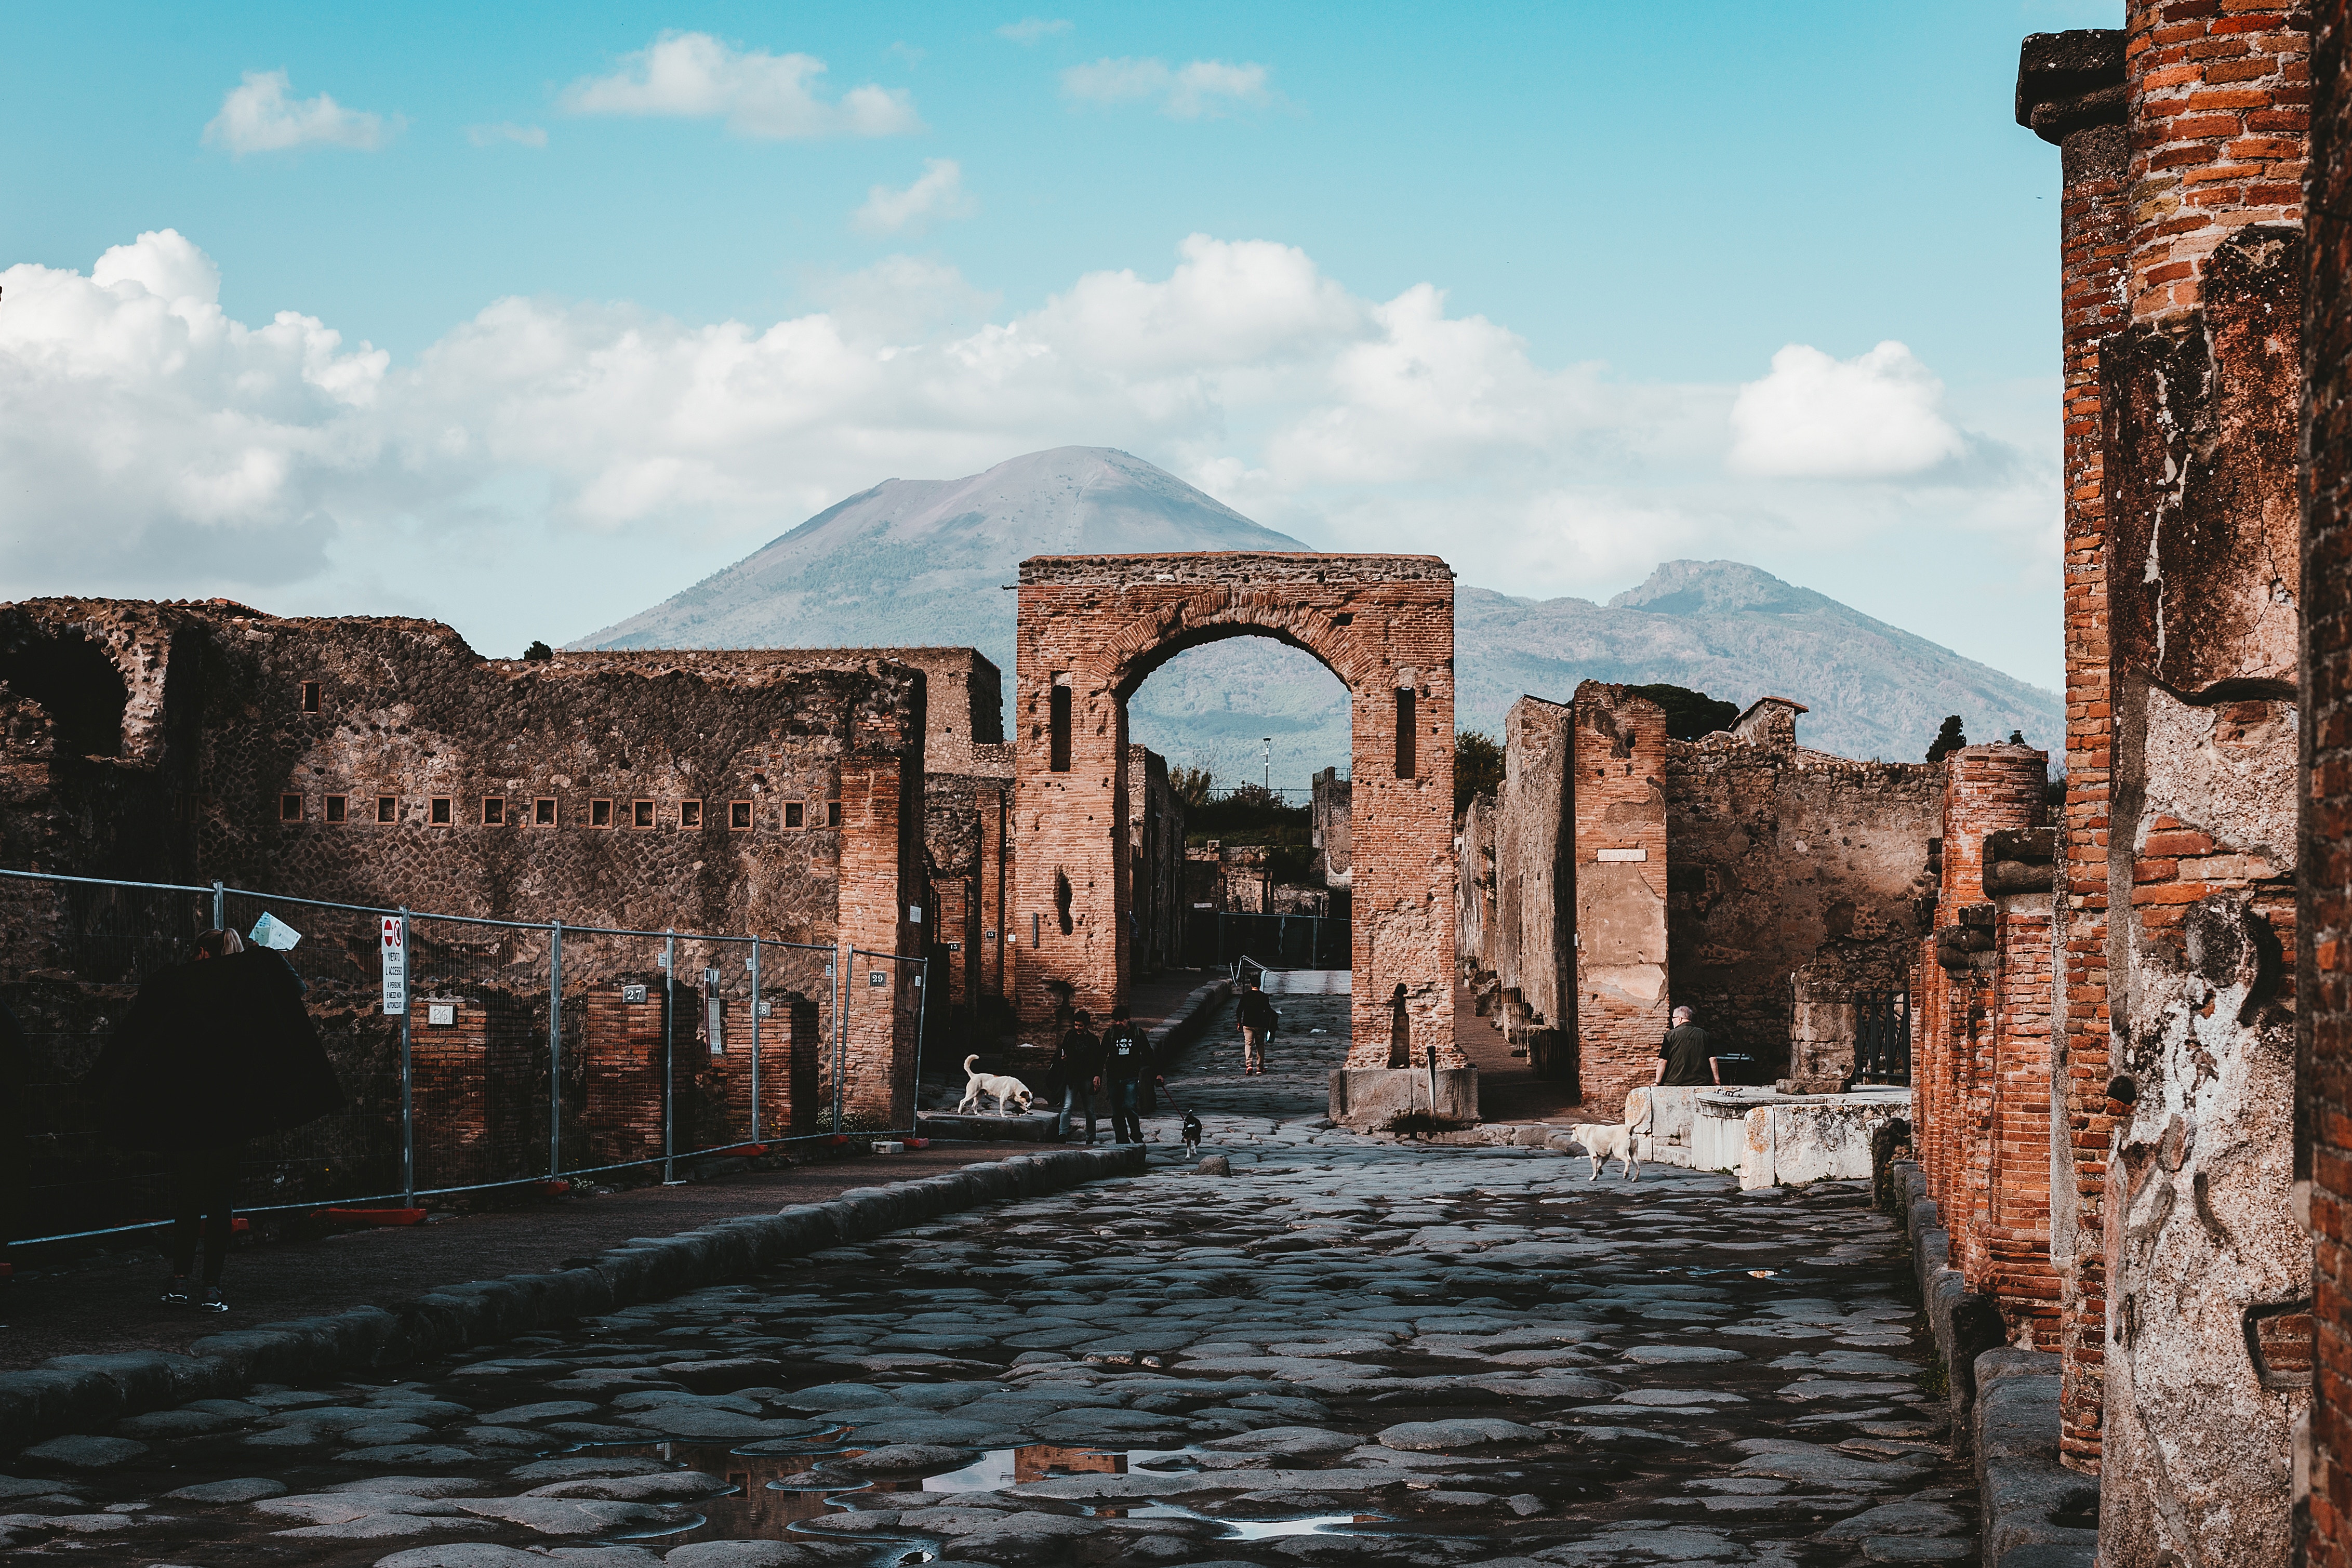 Embark on a guided tour of Pompeii